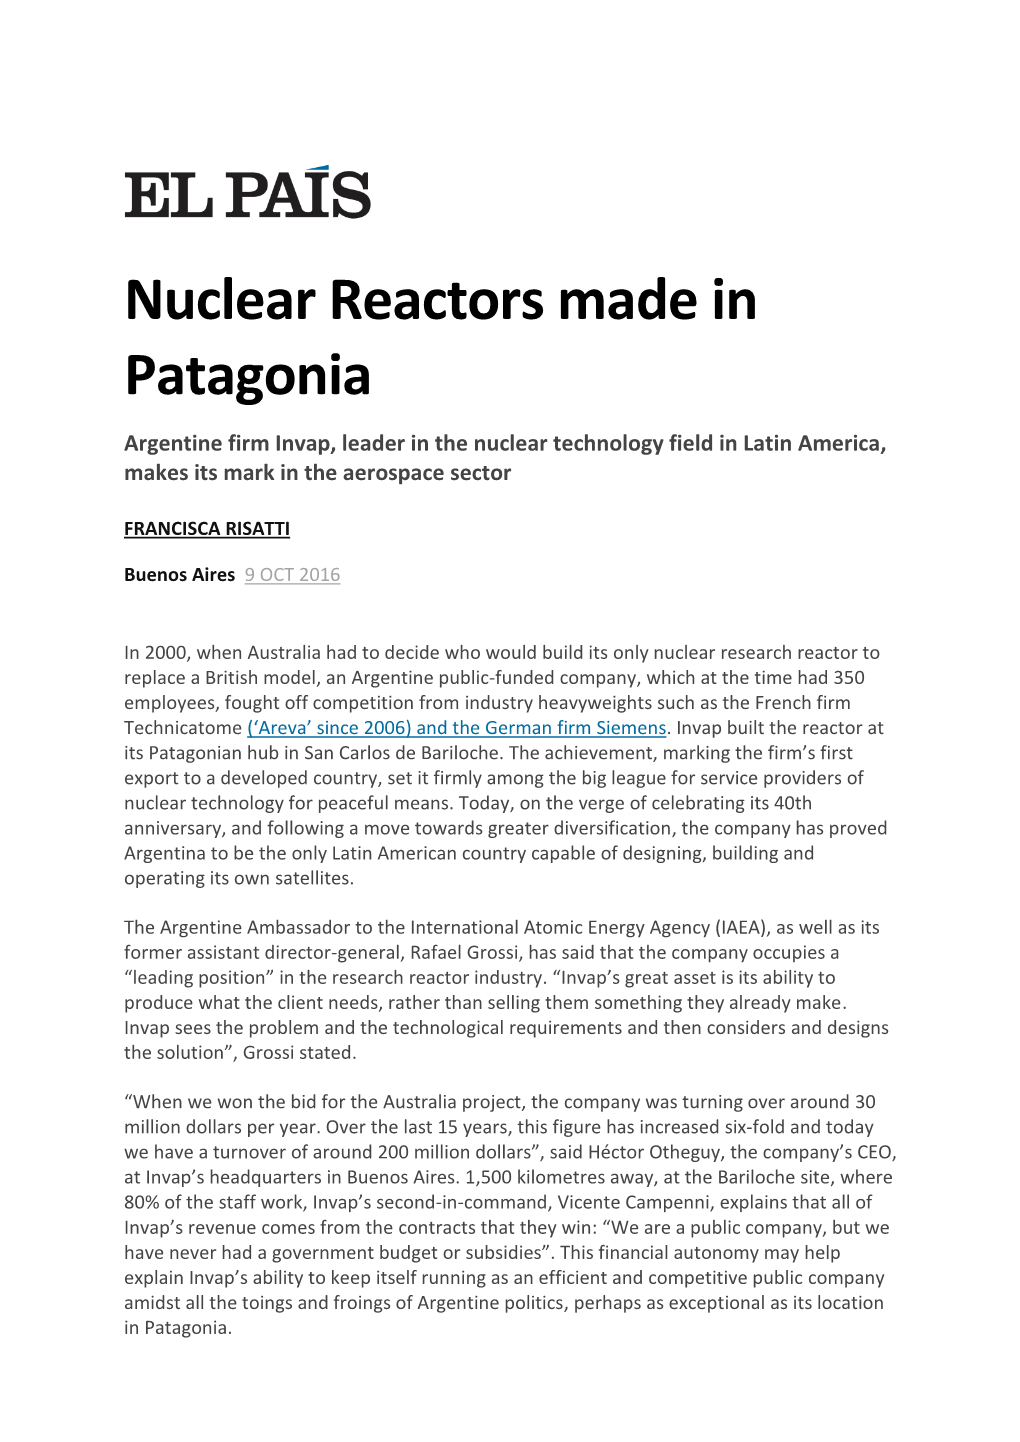 Nuclear Reactors Made in Patagonia Argentine Firm Invap, Leader in the Nuclear Technology Field in Latin America, Makes Its Mark in the Aerospace Sector